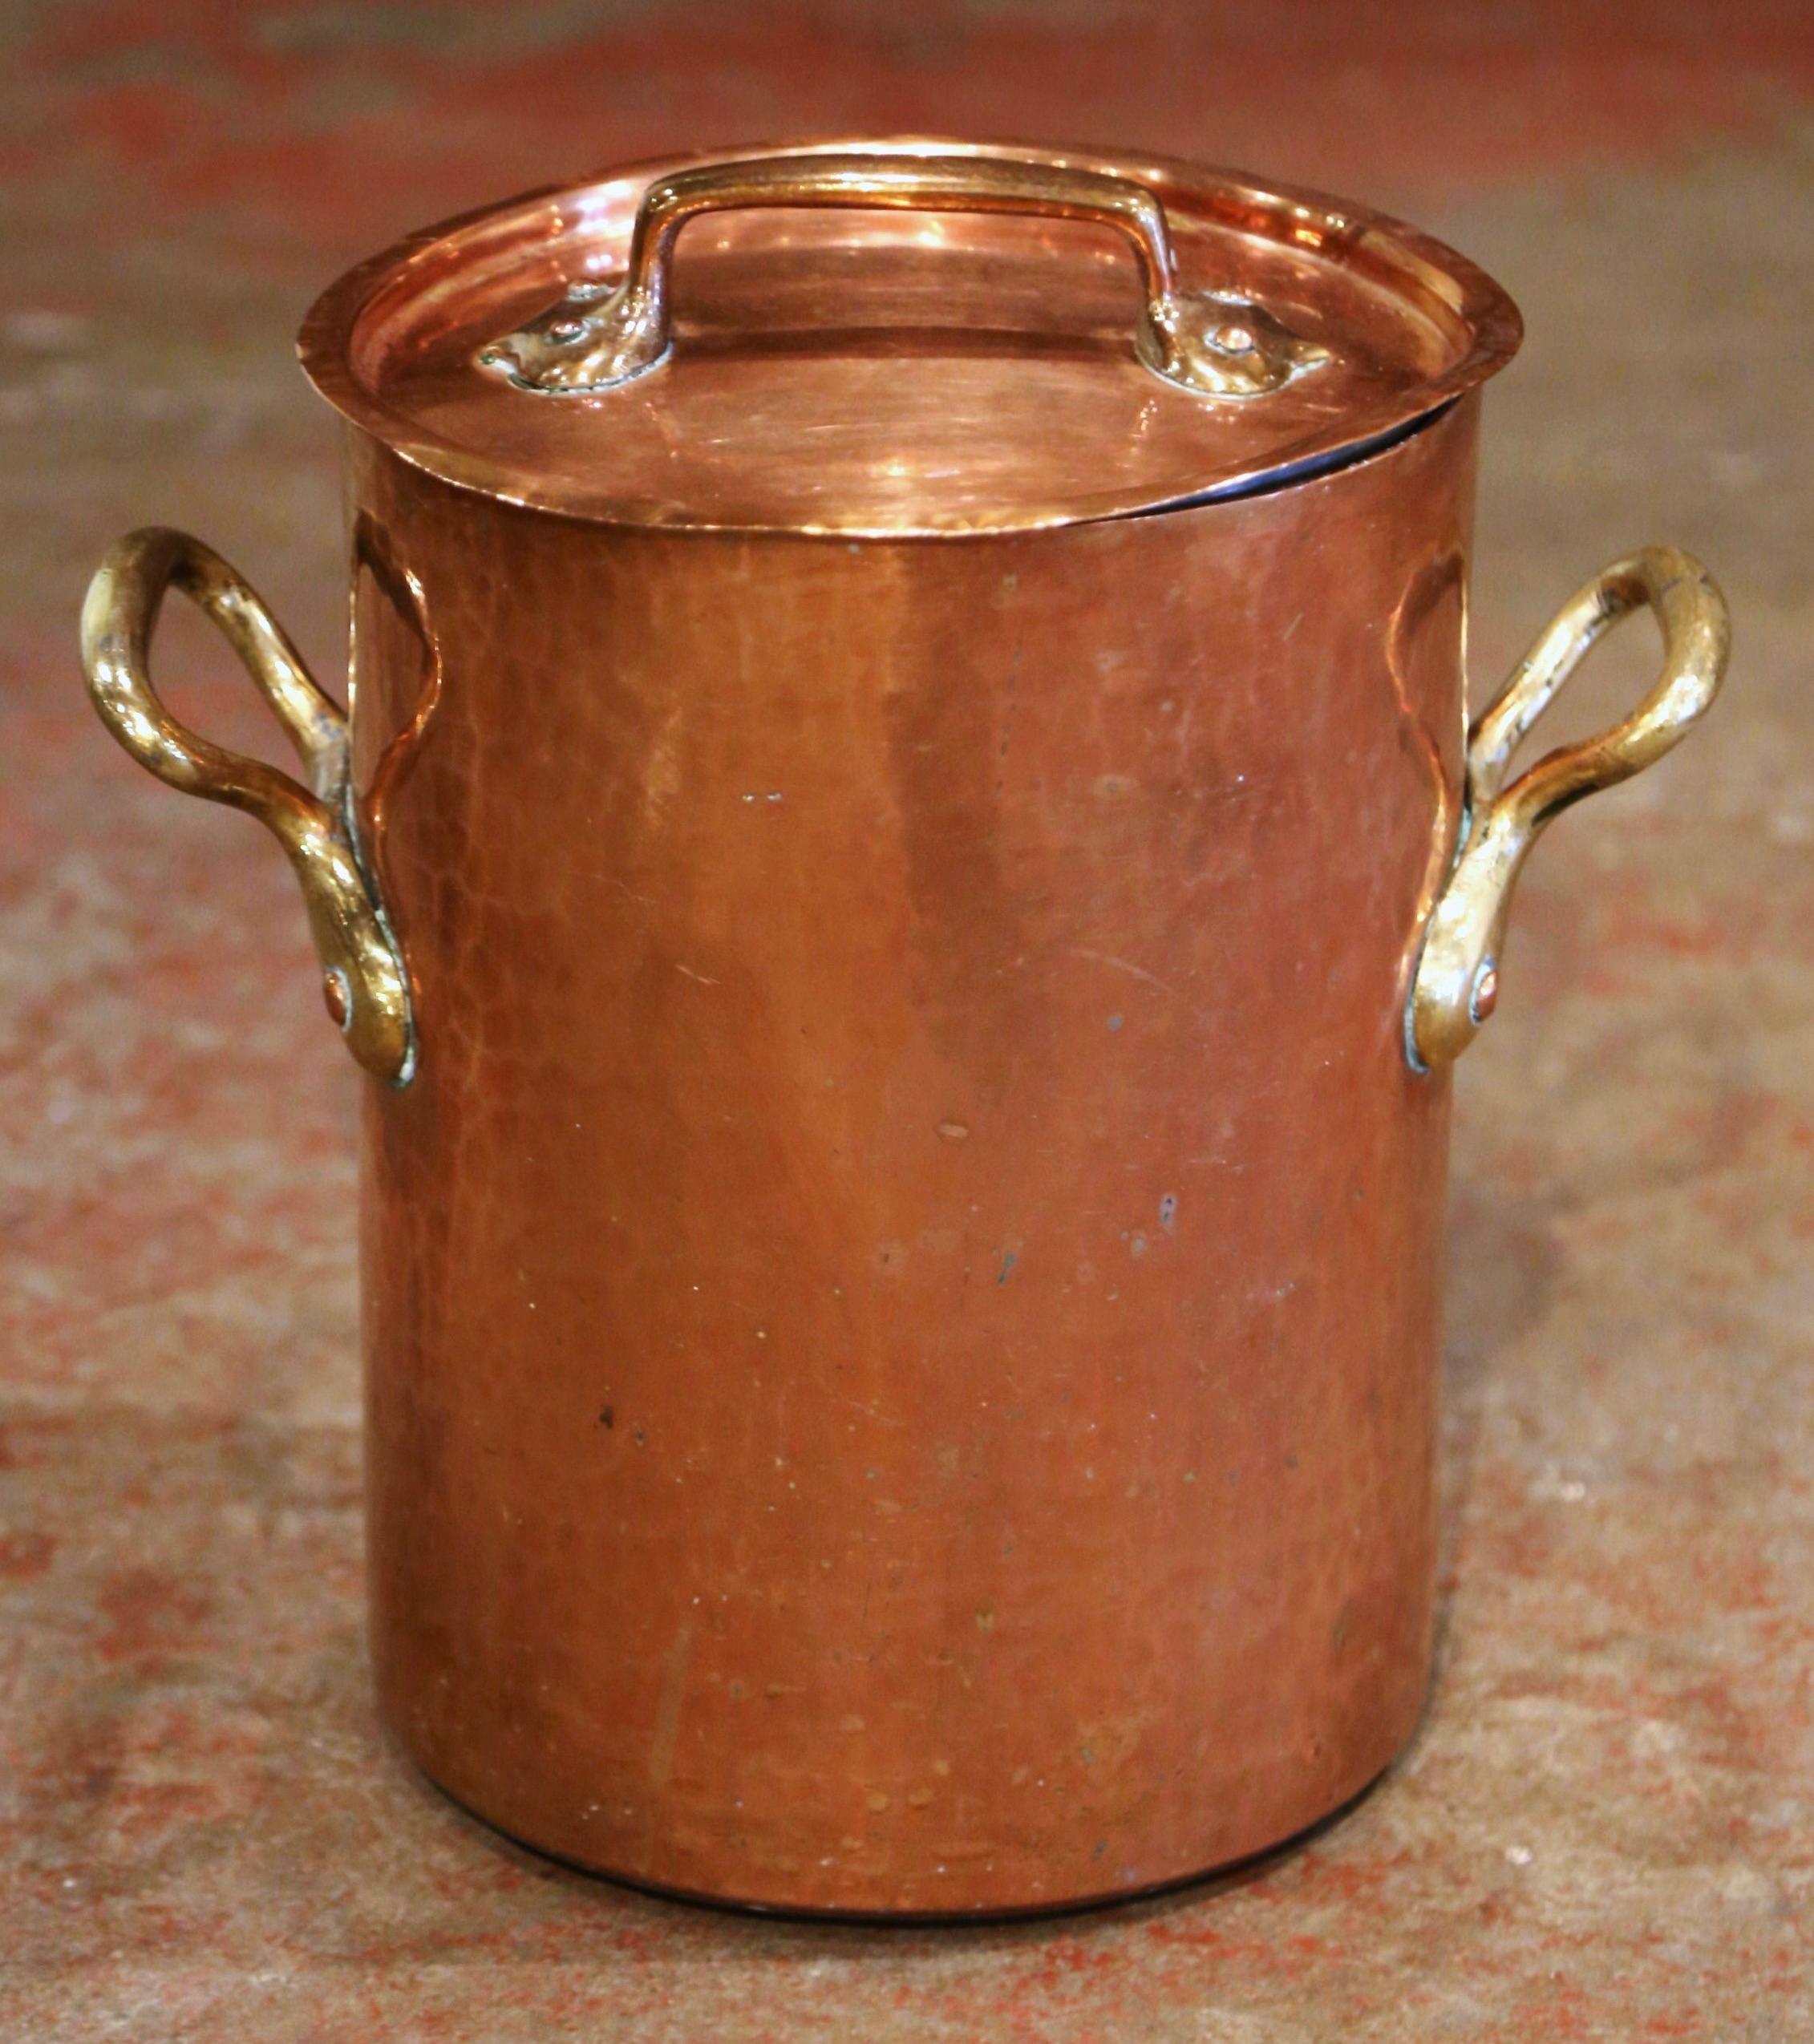 Hand-Crafted Mid-19th Century French Polished Copper Cauldron with Side Handles and Lid